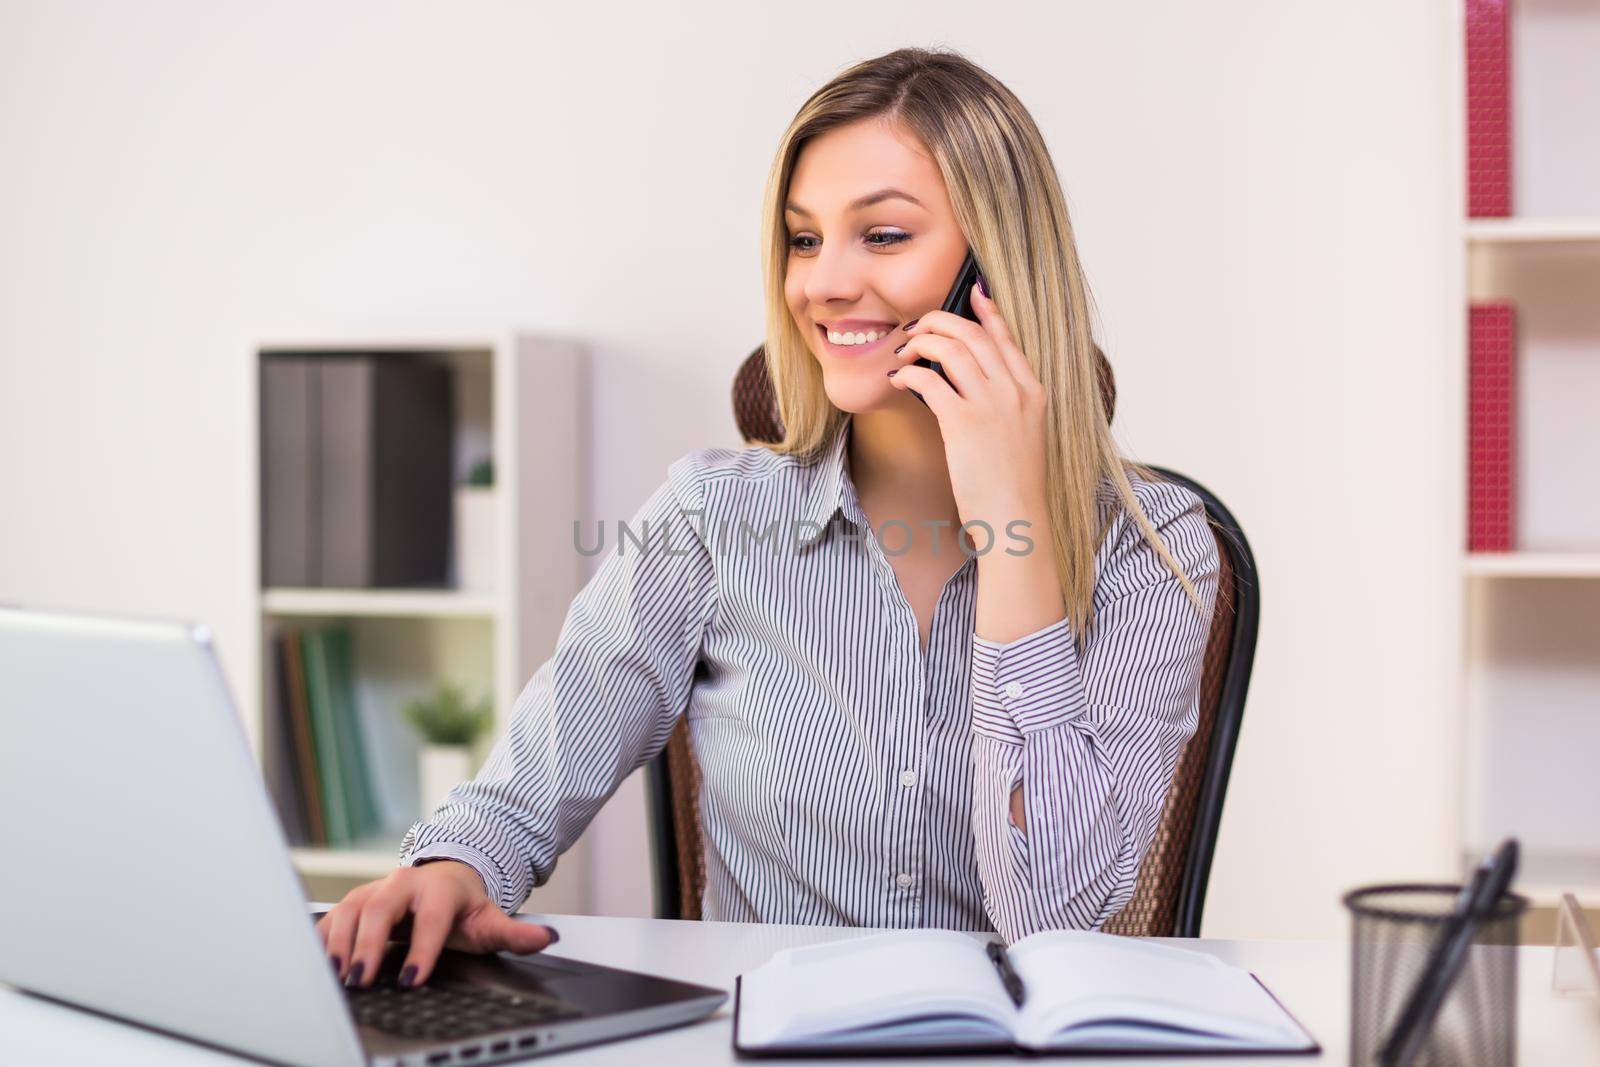 Businesswoman using mobile phone while working in her office.